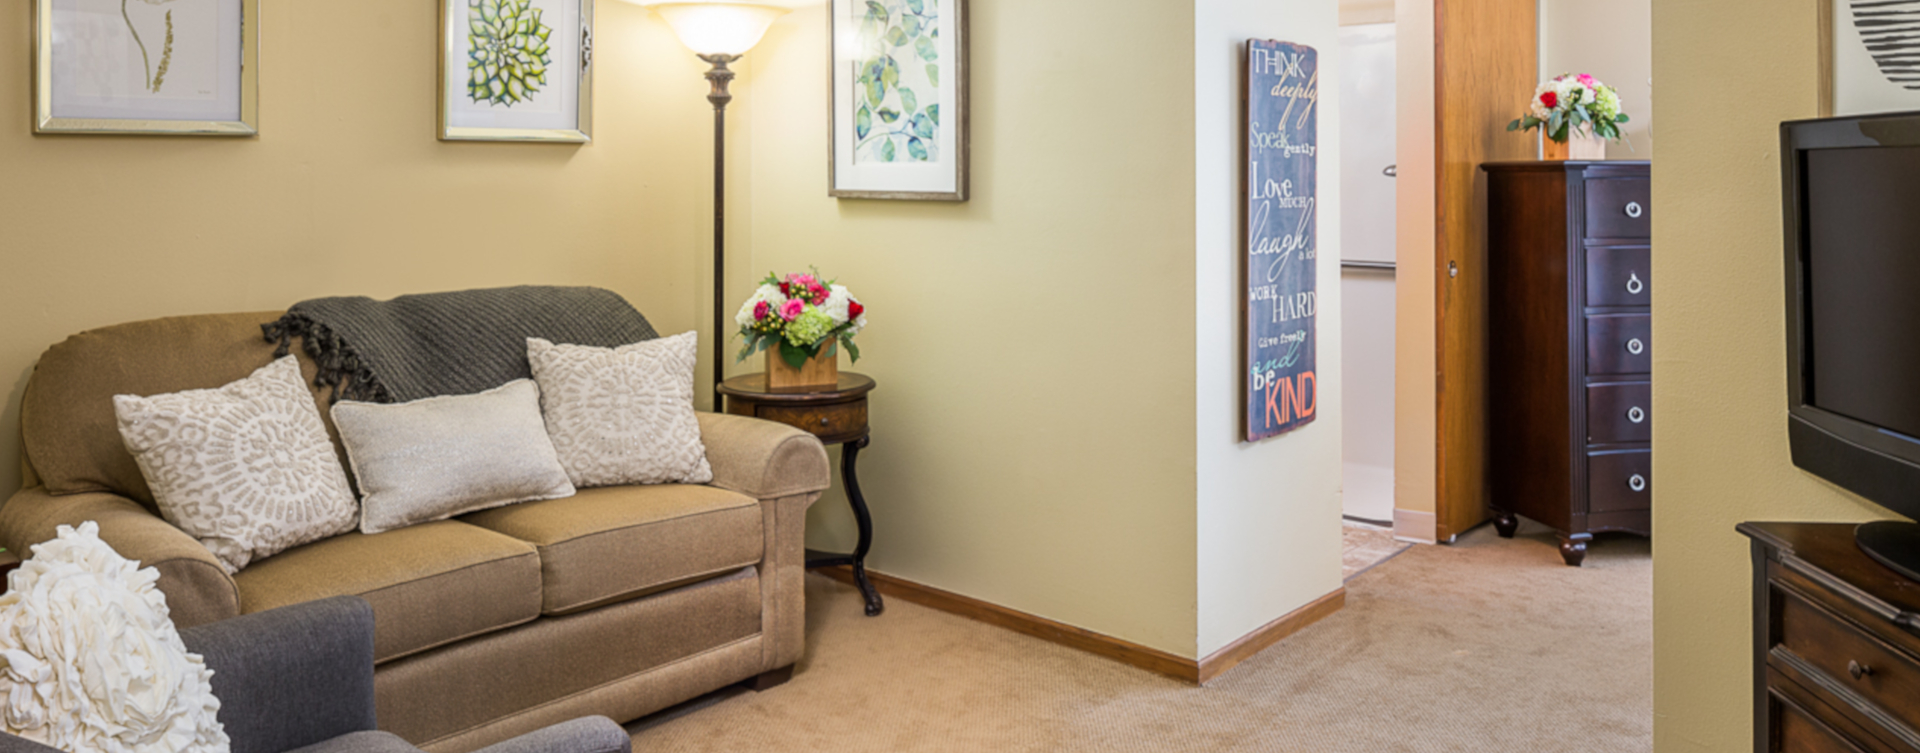 Get a new lease on life with a cozy apartment at Bickford of Lincoln